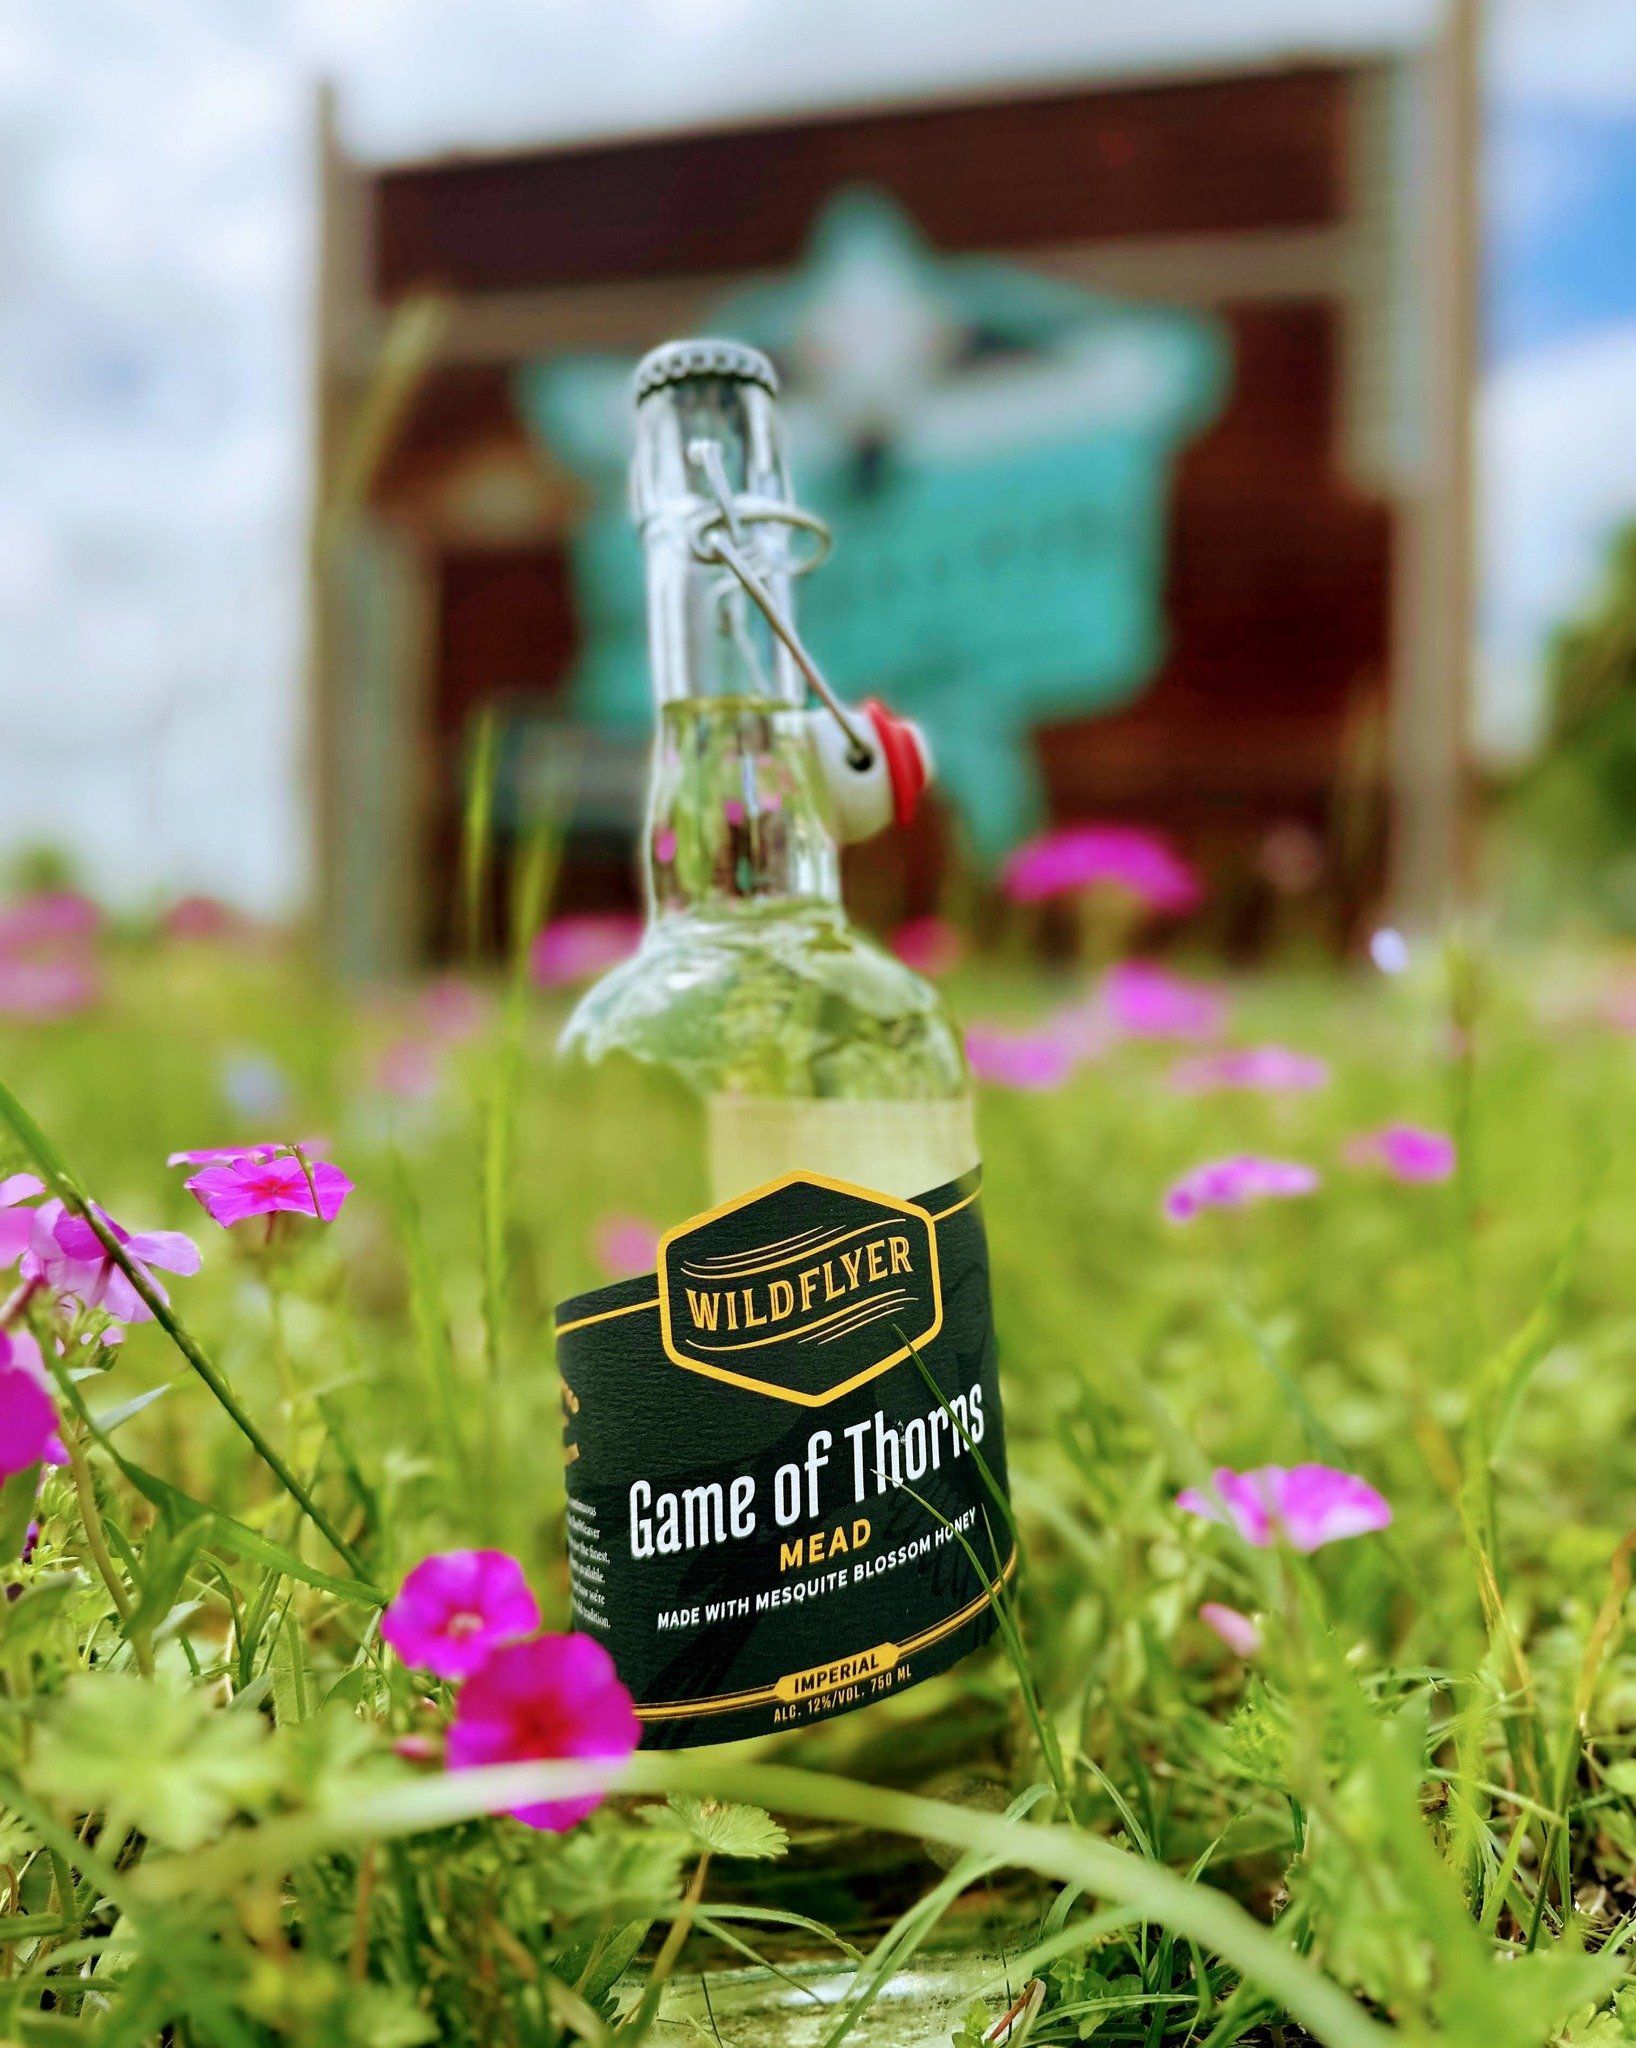 ICYMI - Game of Thorns is back on tap! 

Game of Thorns is our award-winning imperial traditional mead made with mesquite blossom honey. 

It is a delicate, semi-sweet mead with a subtle earthiness...true to its terroir. 

If you've never tried mead 